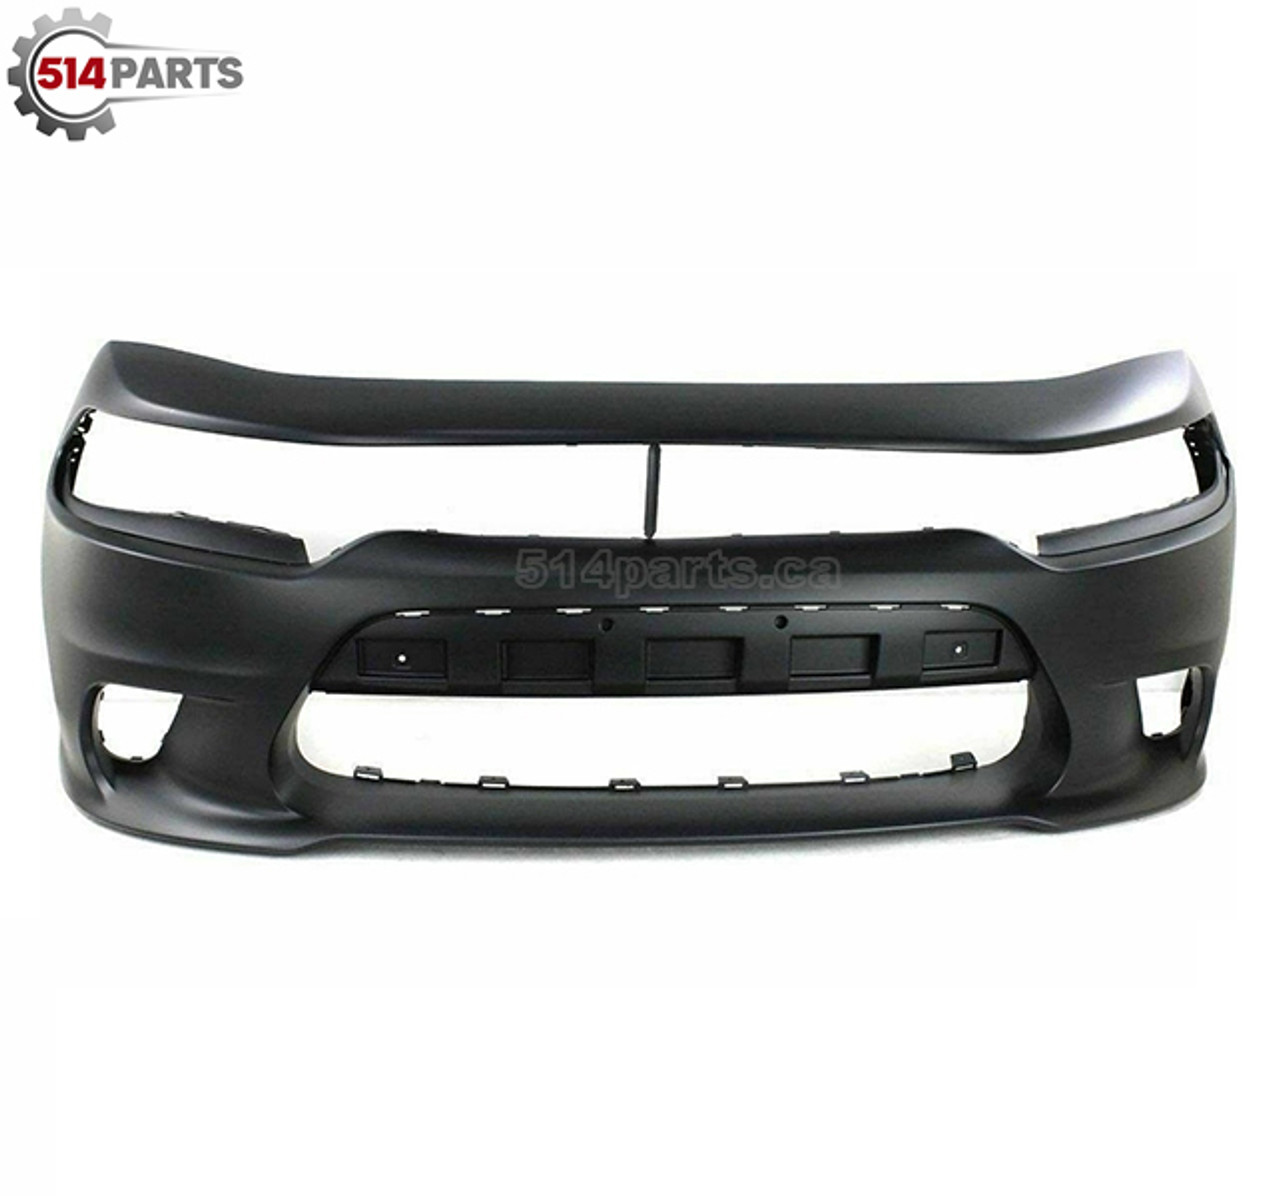 2015 - 2021 DODGE CHARGER FRONT BUMPER COVER for USE WITH HOOD SCOOP MODELS - PARE-CHOC AVANT a UTILISER AVEC SCOOP